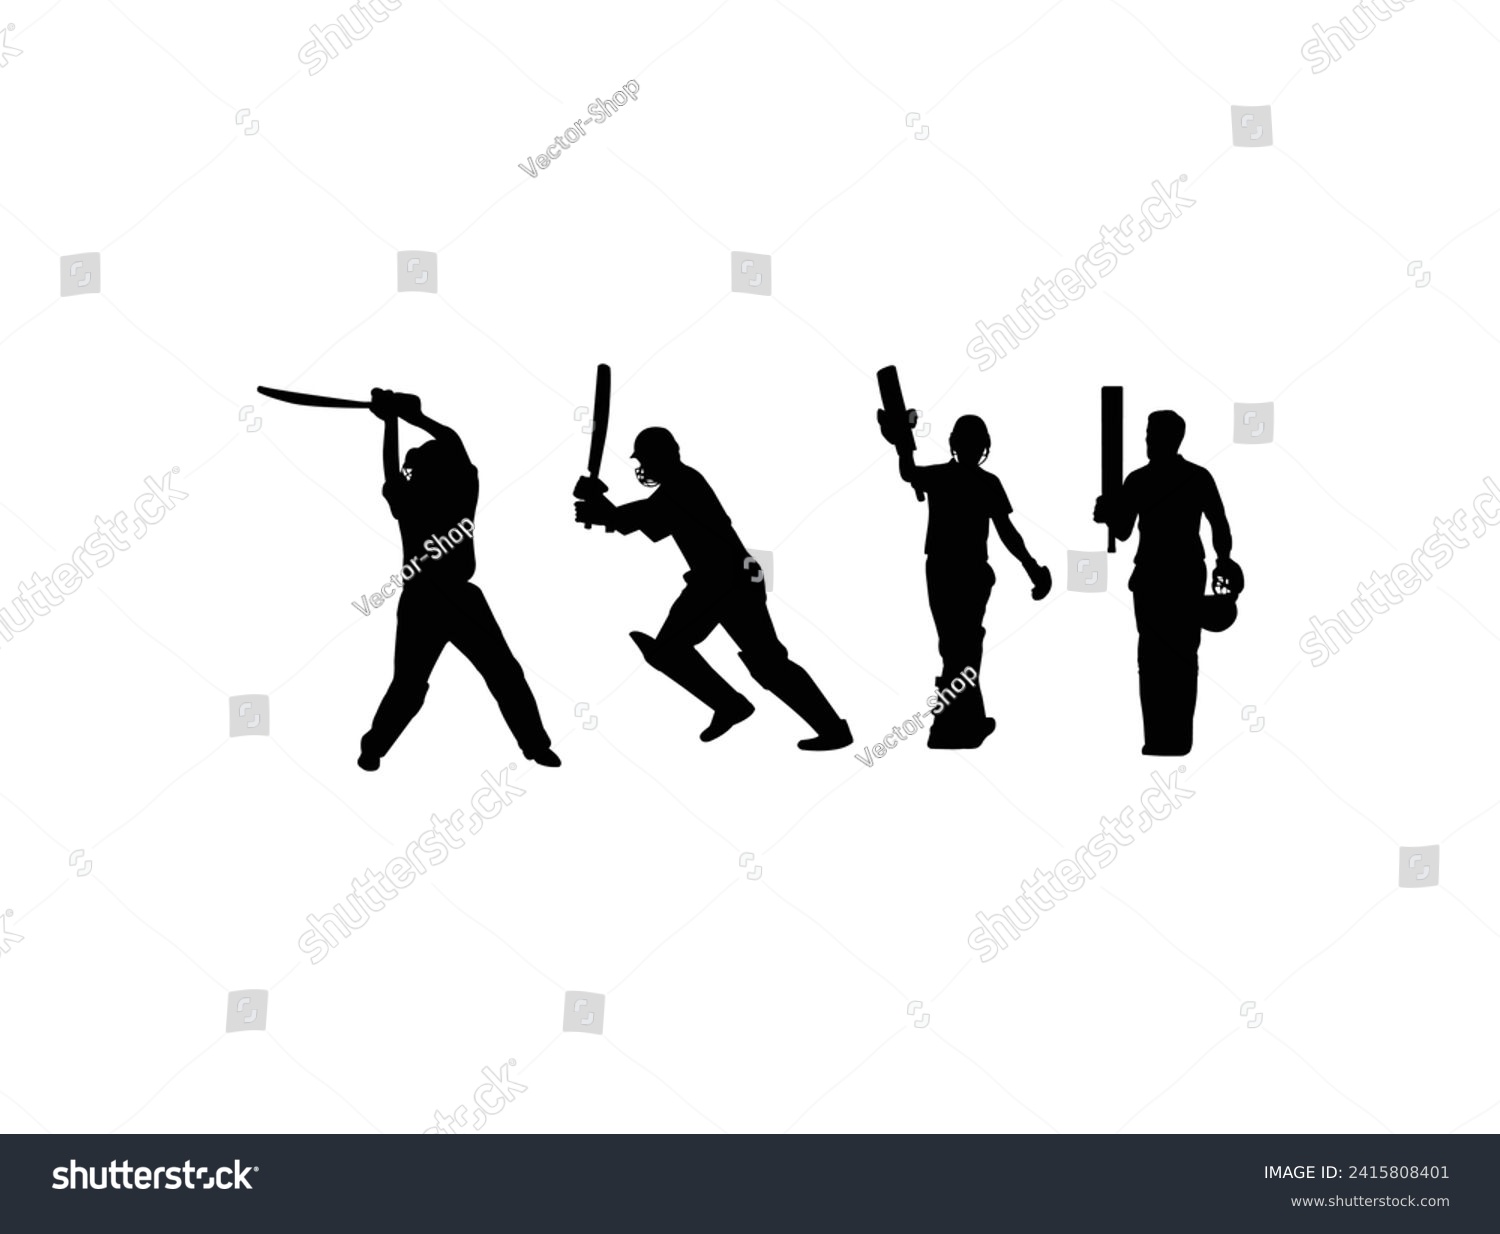 SVG of The set of cricket player silhouette. Large collection of silhouettes of cricket players. Vector set of cricket player silhouettes, Batsmen, Bowlers, and Cricket Elements. svg